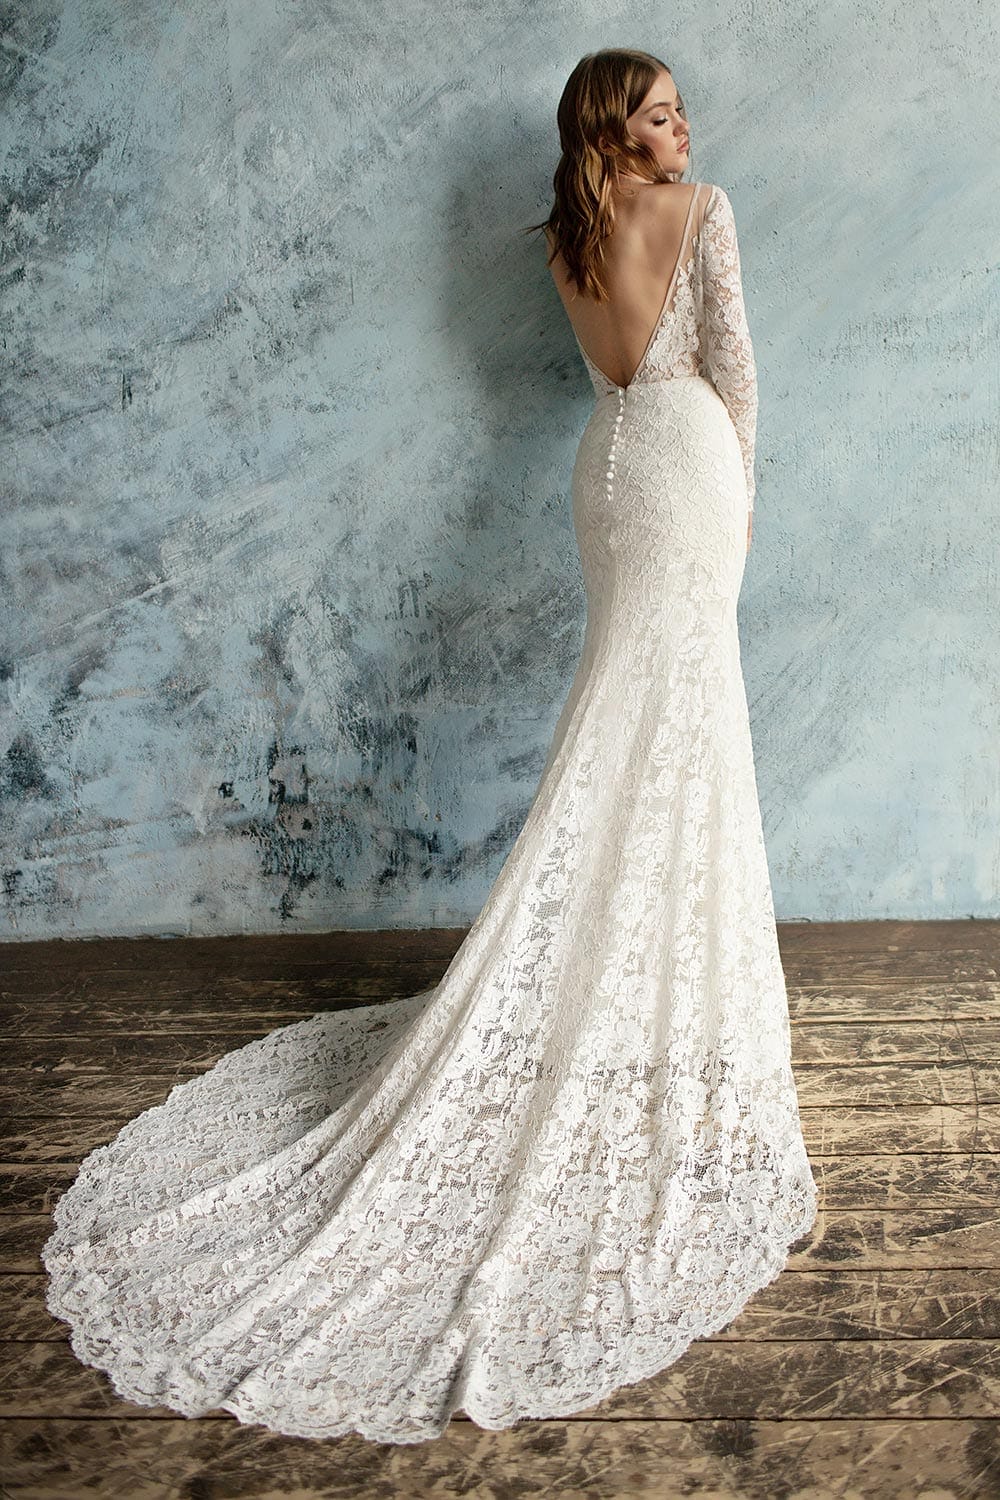 Lace Wedding Dresses: 49 Beautiful Picks to Suit All Brides - hitched.co.uk